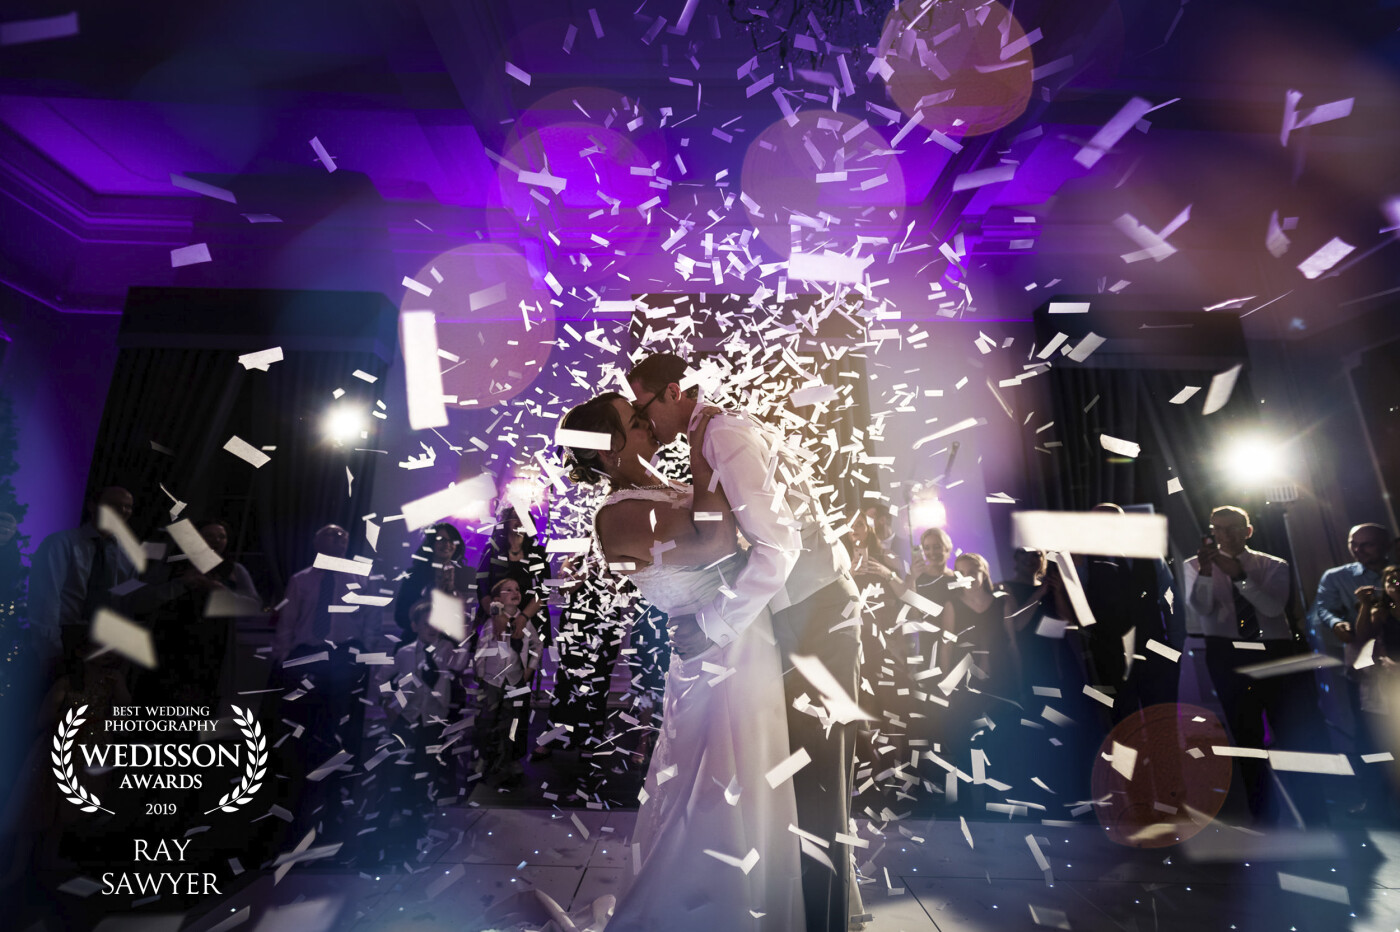 The DJ and I discussed when to set of the Confetti canons. I took some 1st dance shots and then quickly switched to a wide angle 14mm lens and crouched down ready for the canons. I knew exactly the beat of the song for when the were to explode so I locked focus on the couple and fired several shots and selected the best of the bunch. Everyone loved the confetti canons going off.